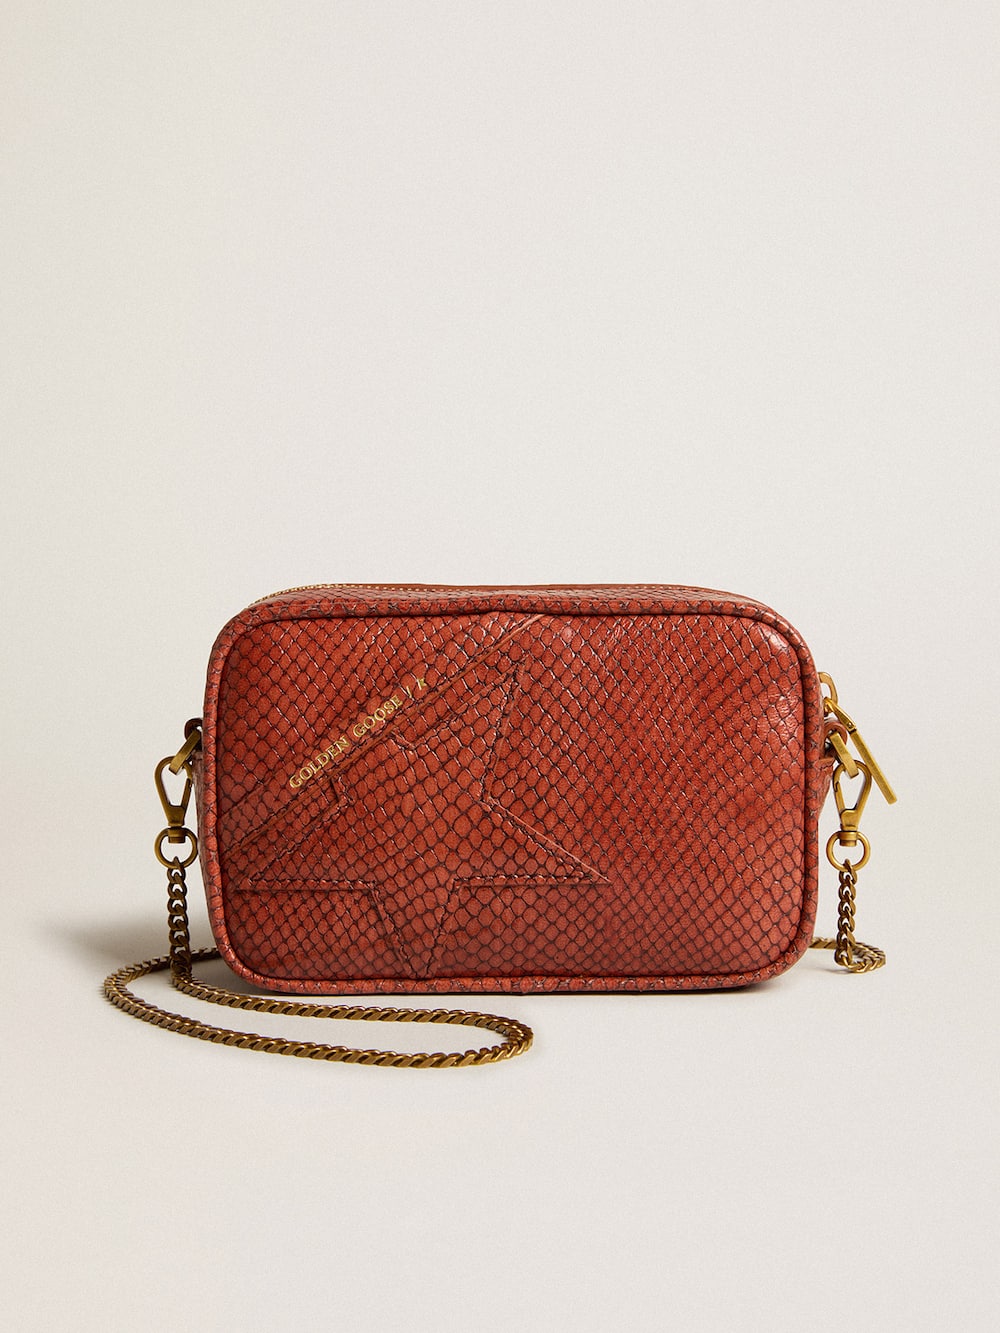 Golden Goose - Mini Star Bag in rust-colored snake-print leather in 